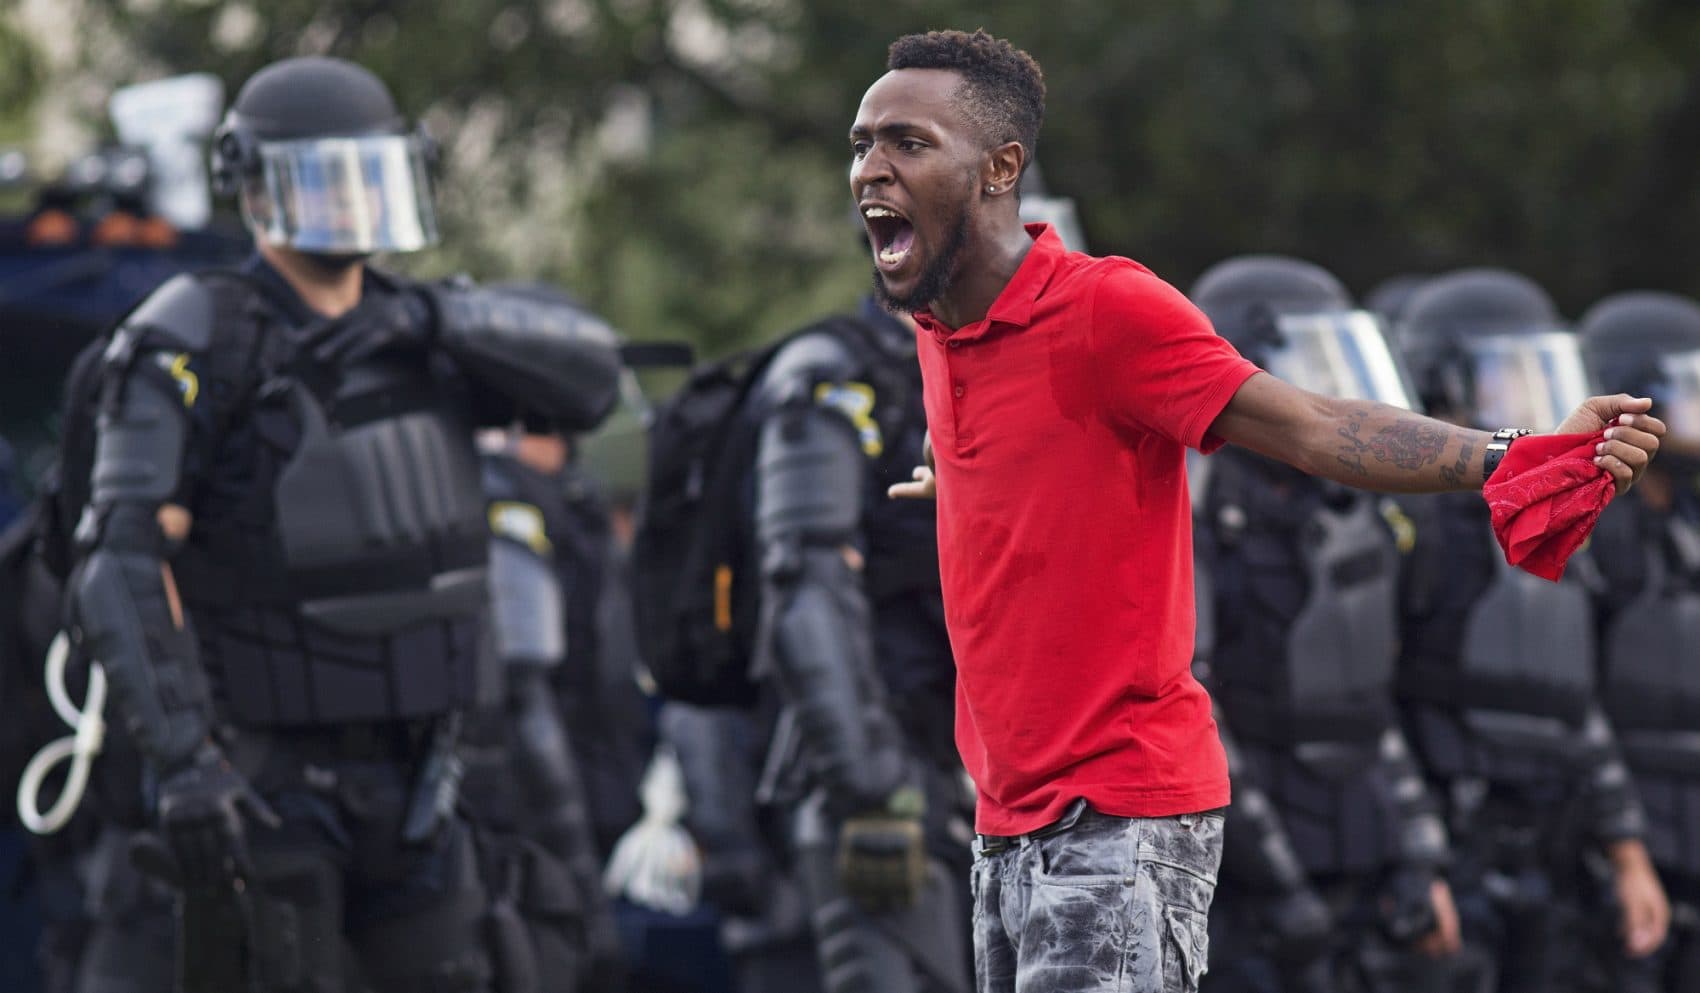 A protester yells at police in front of the Baton Rouge Police Department headquarters after police arrived in riot gear to clear protesters from the street in Baton Rouge, La., Saturday, July 9, 2016. Several protesters were arrested. (Max Becherer/AP)